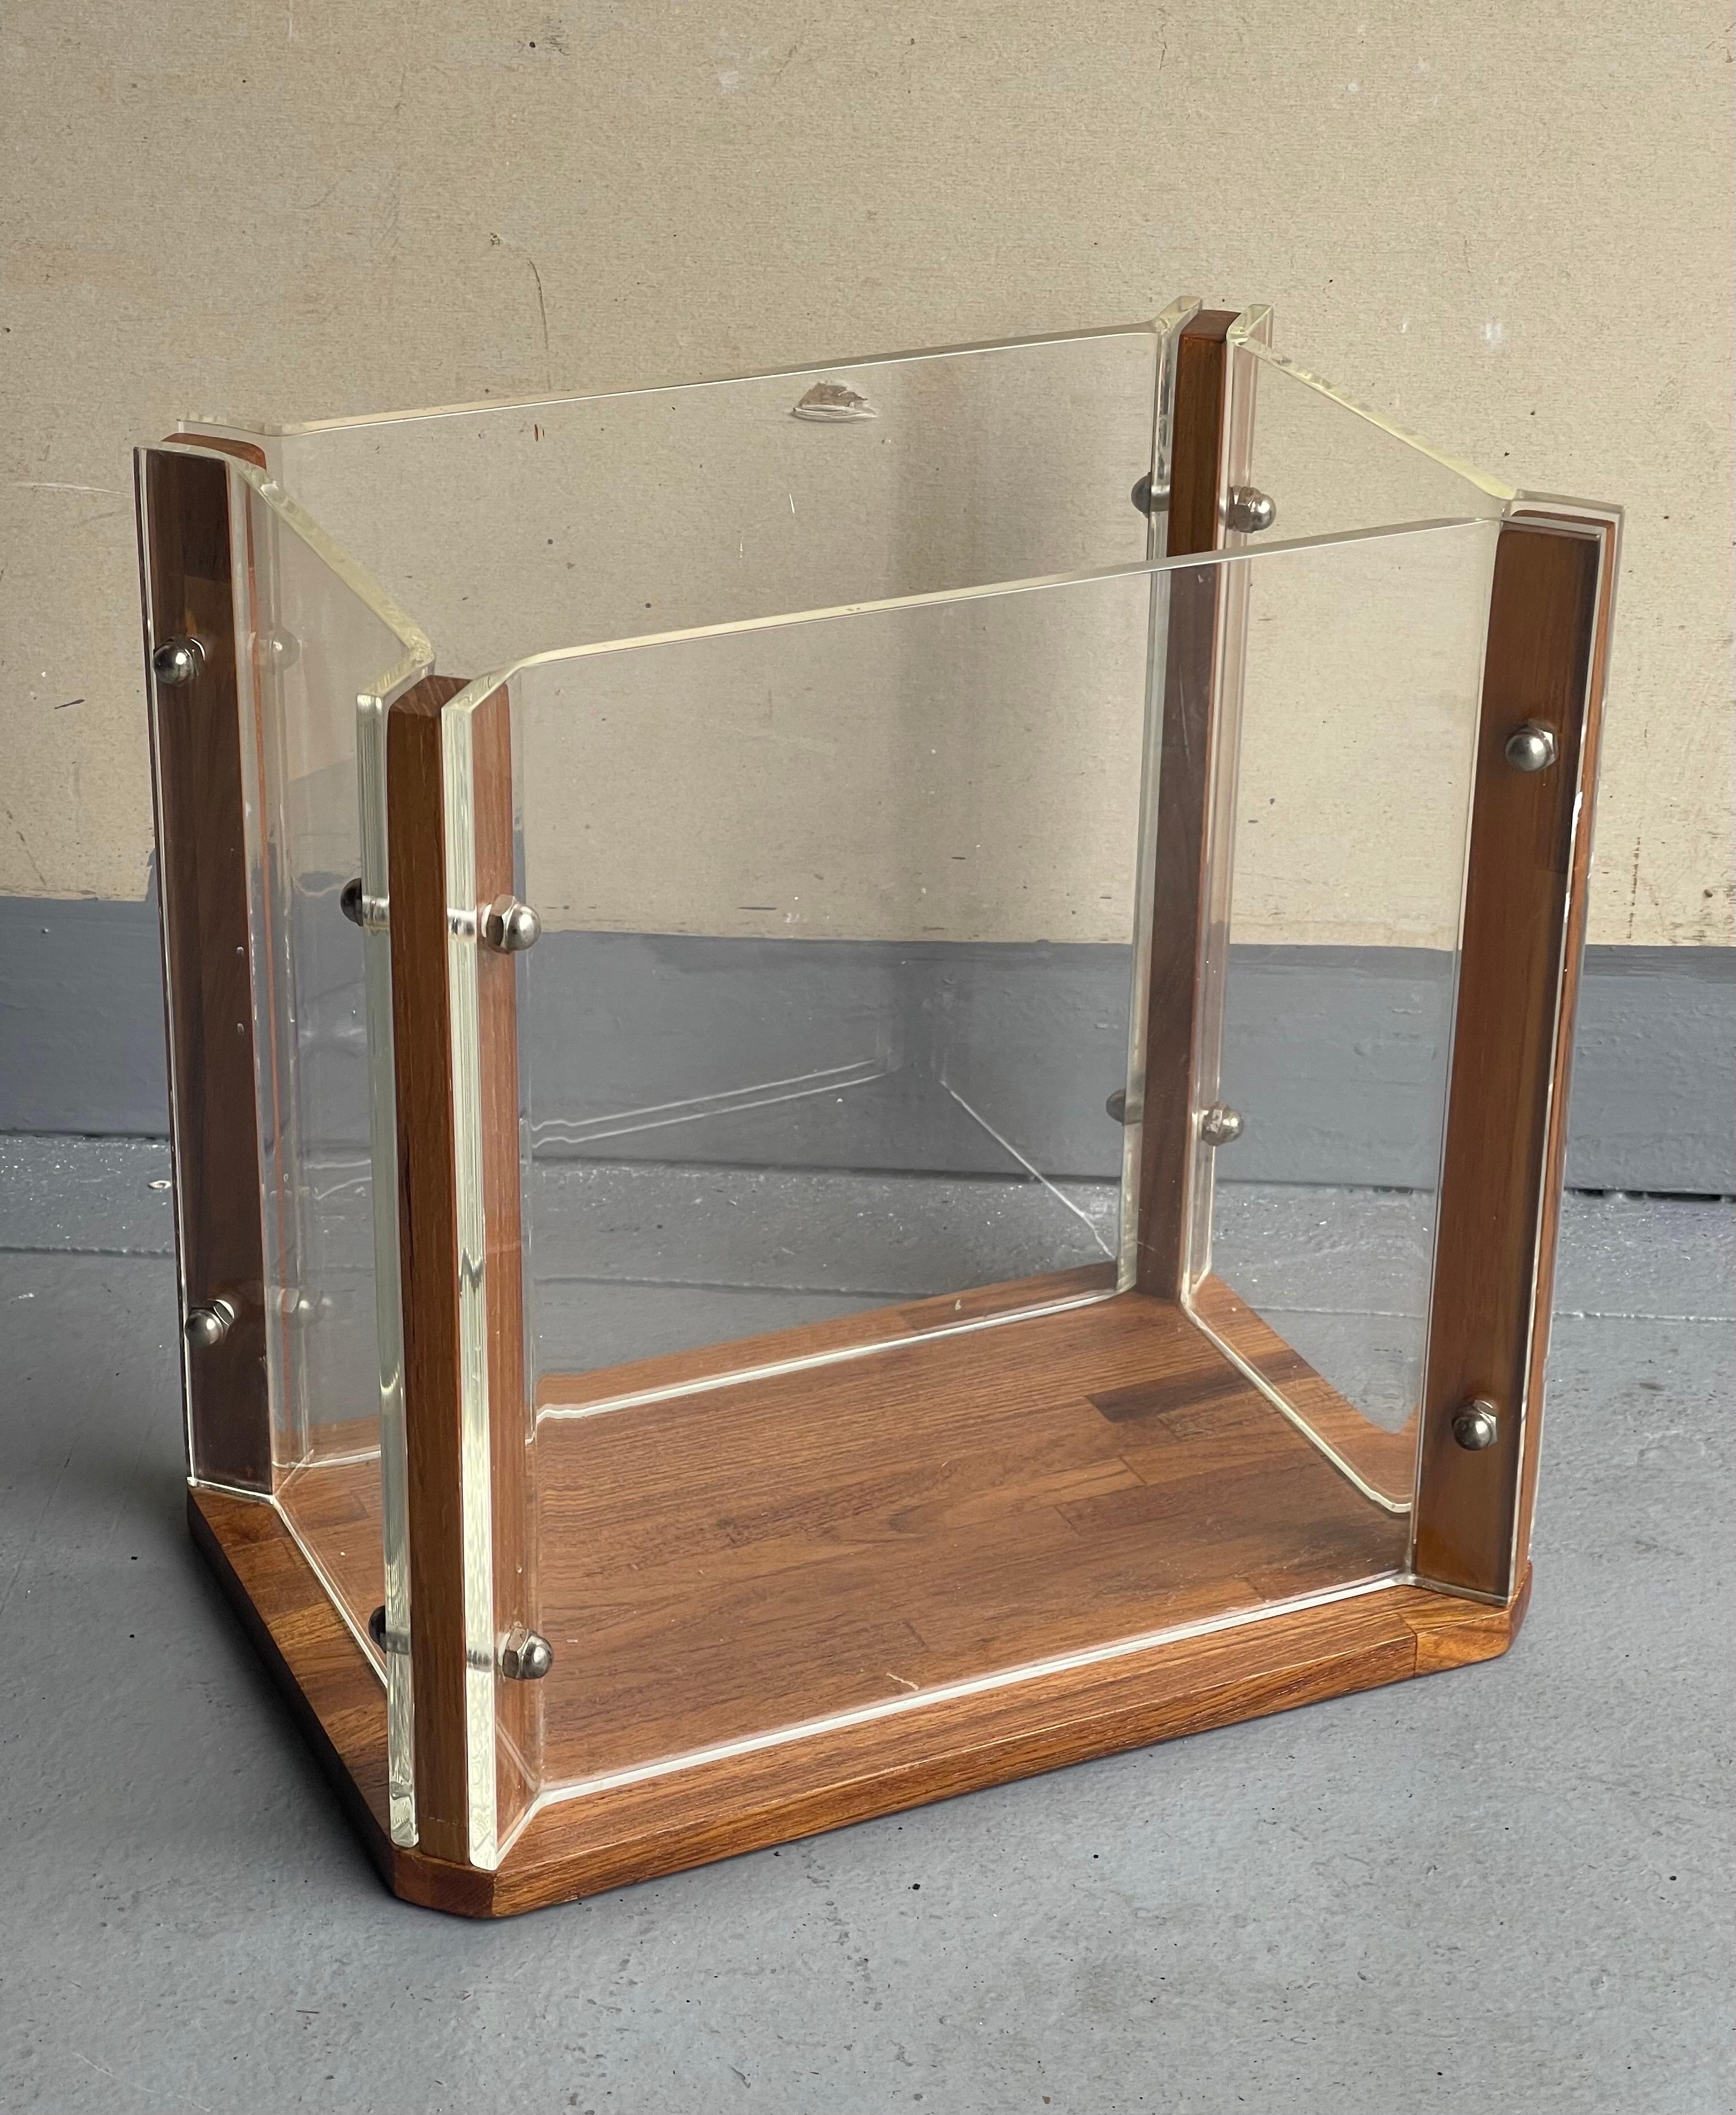 Simple and elegant MCM teak and lucite wastebasket, circa 1970s. The wastebasket is in excellent condition no chips or cracks and measures 11.75